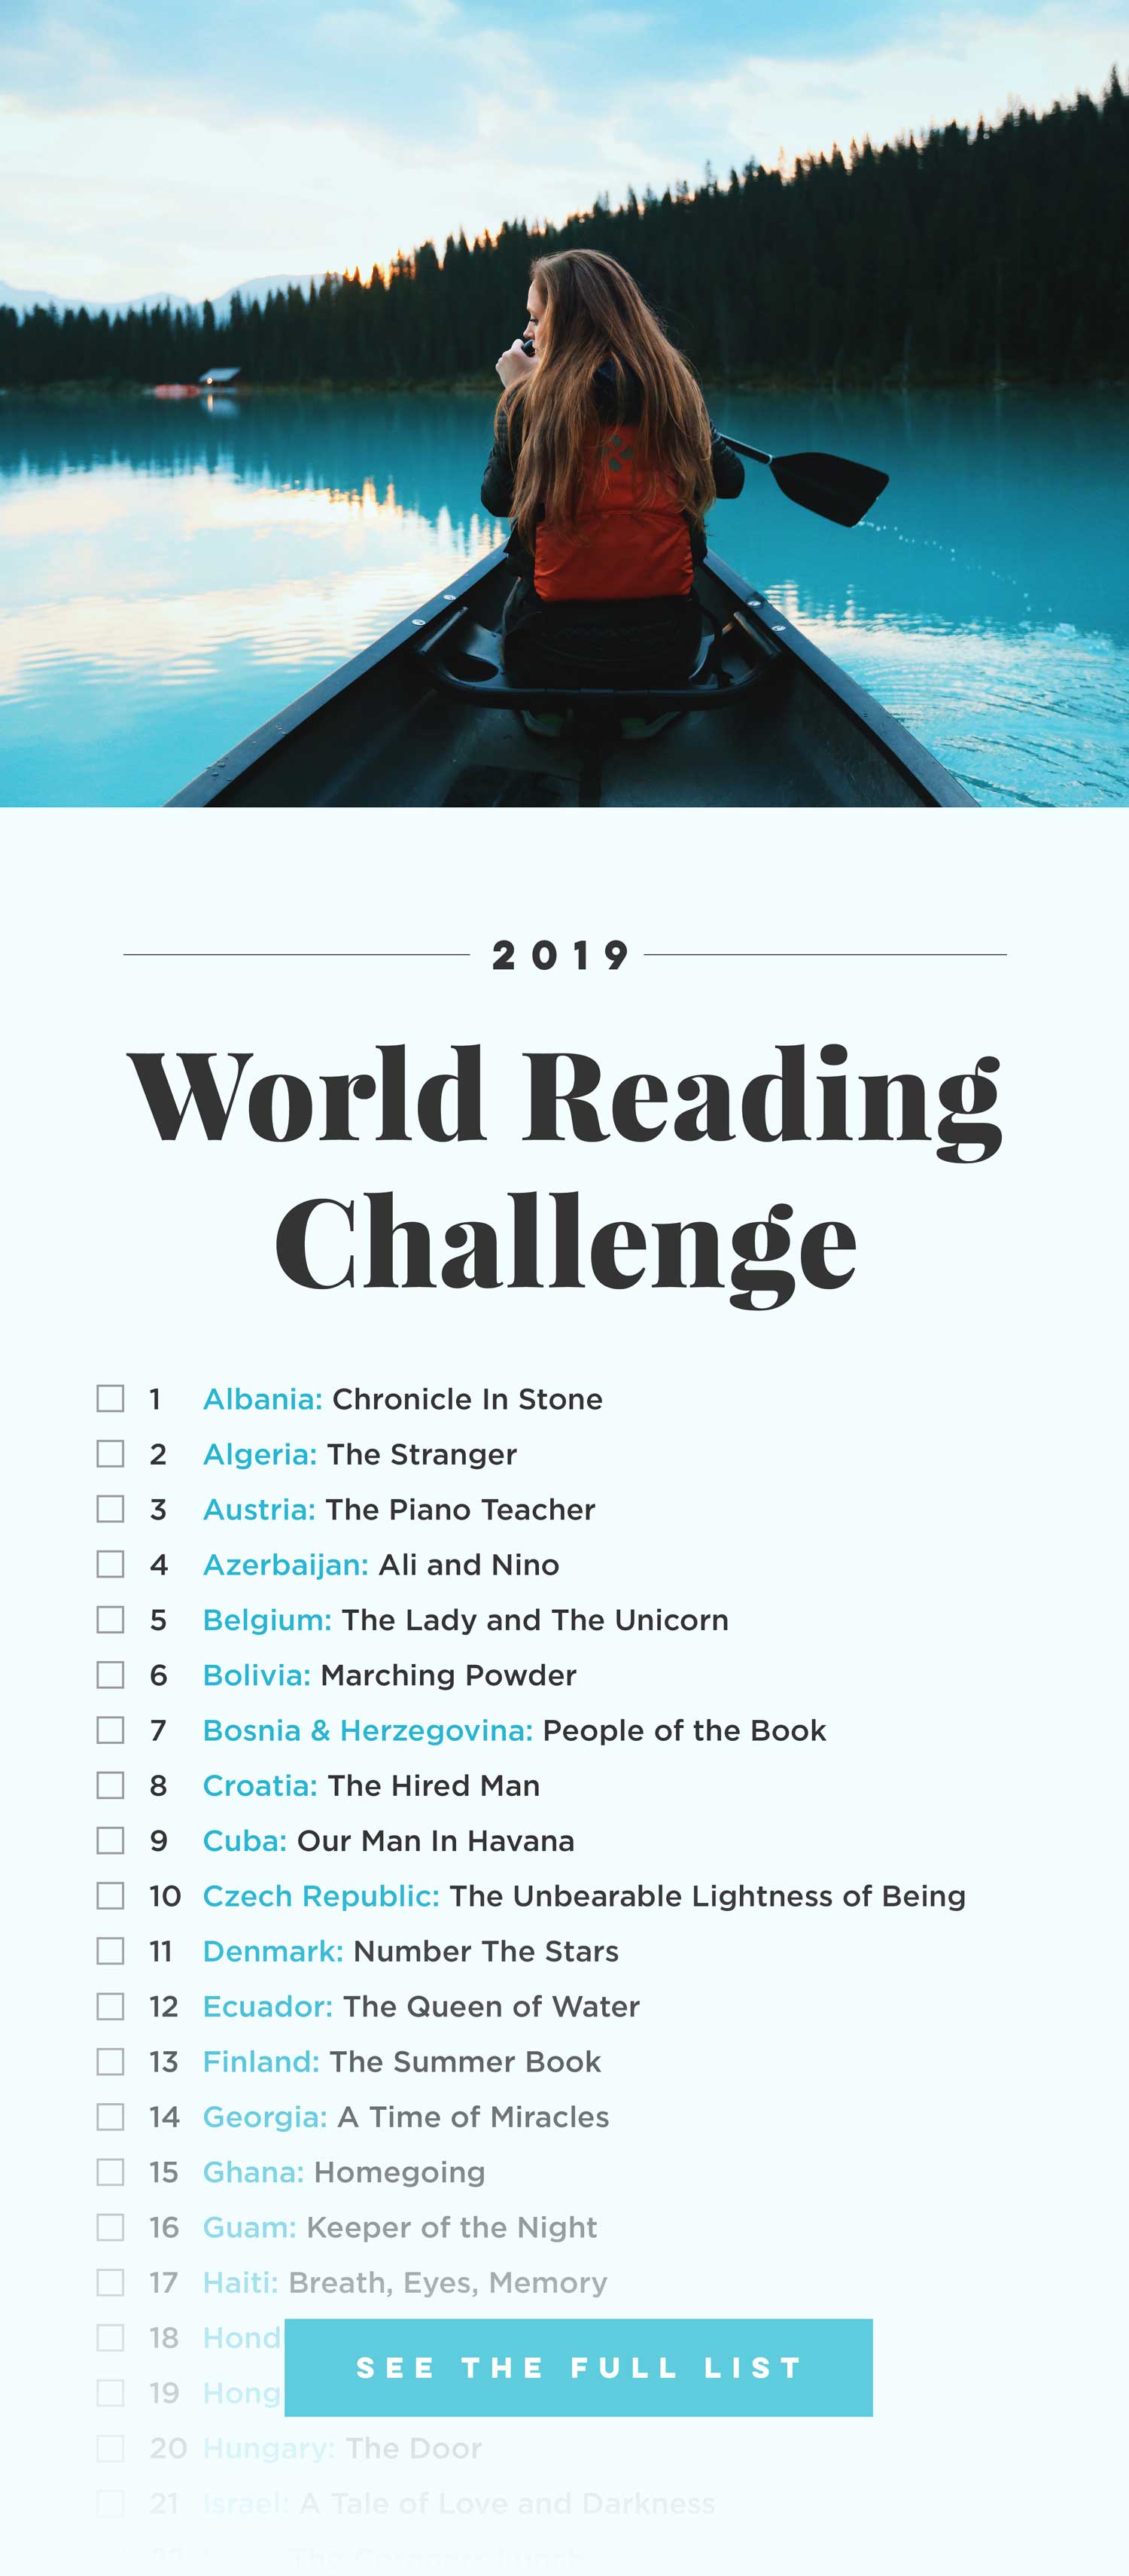 World Reading Challenge, Books Around The Globe - For more books visit www.taleway.com to find books set around the world. reading challenge, 2019 reading challenge, world reading challenge, book challenge, 52 books, 52 weeks, new years resolution, books you should read, books from around the world, world books, books and travel, travel reads, reading list, books around the world, books to read, books set in different countries